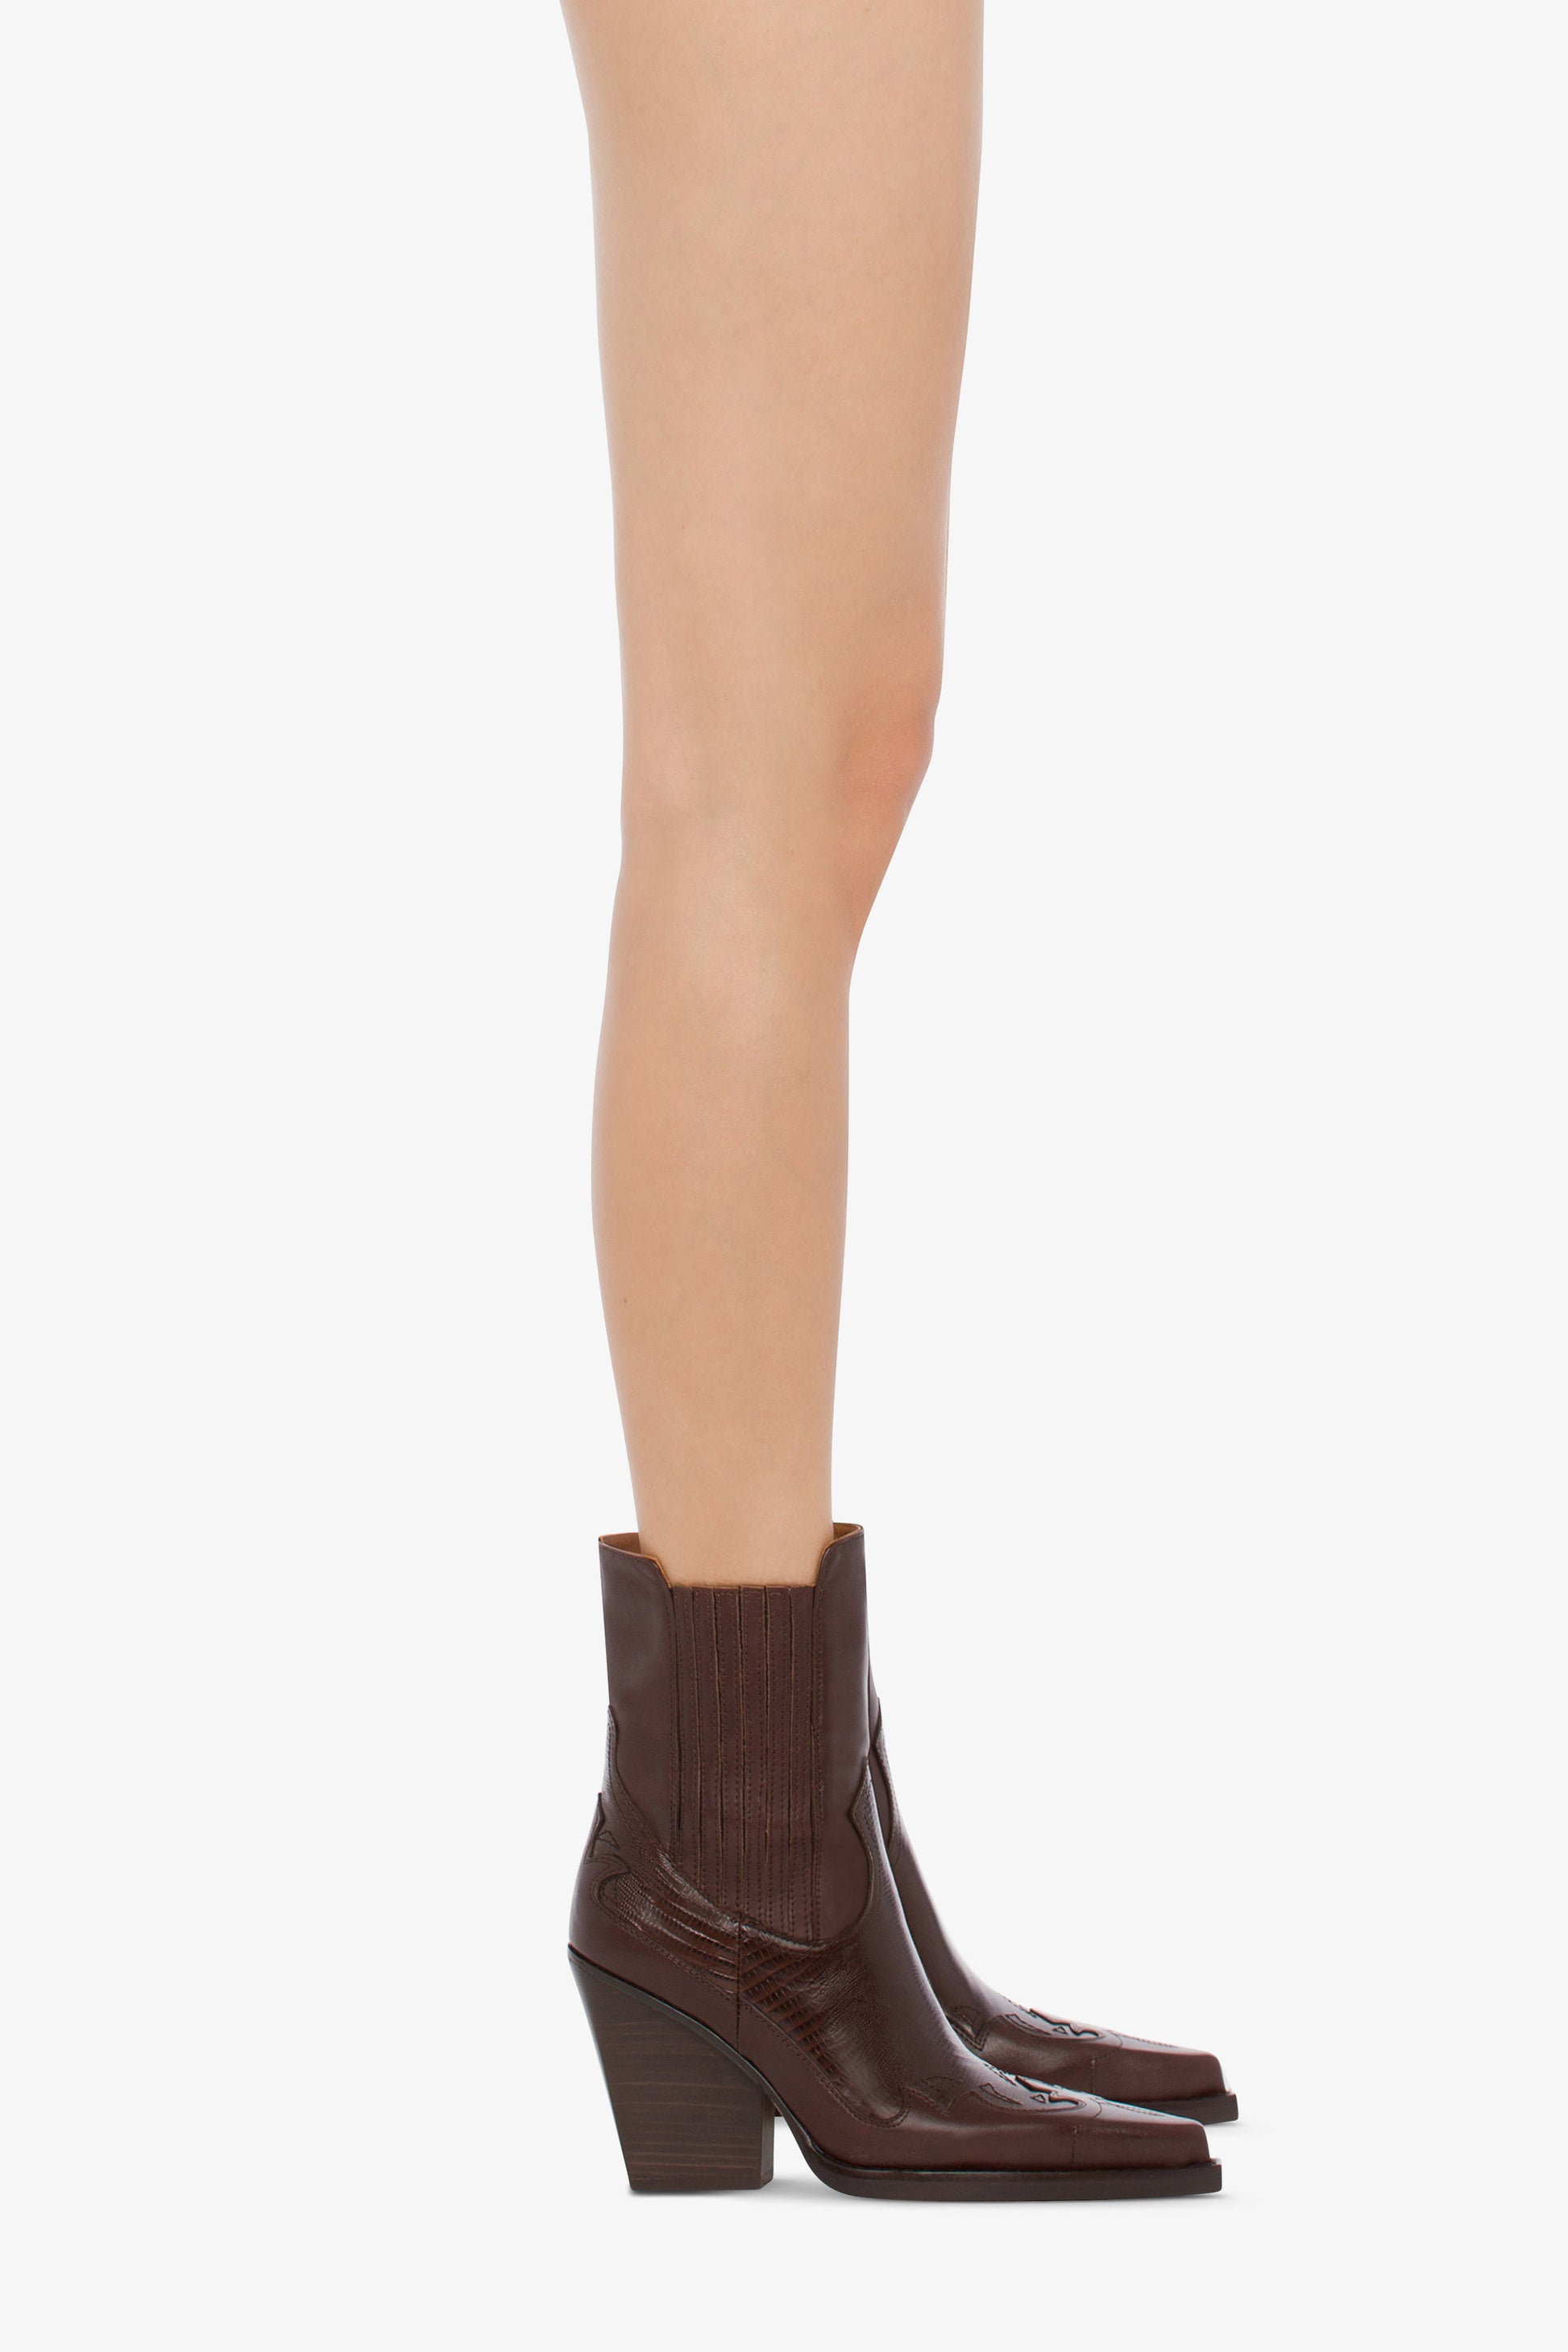 Pointed ankle boots in chocolate and mocha lizard-printed leather - Produit porté